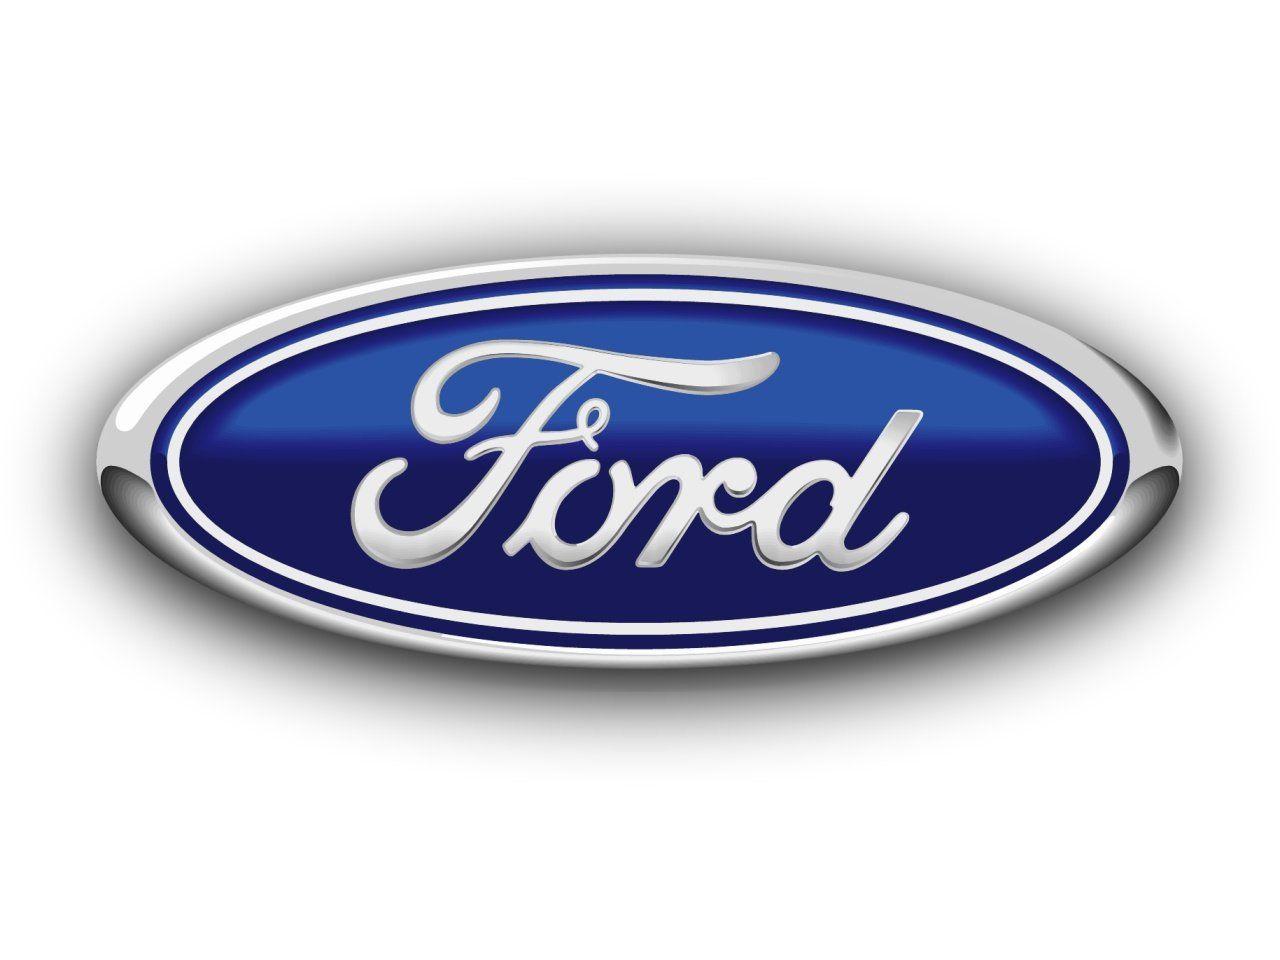 Ford Logo - Ford Logo, Ford Car Symbol Meaning and History | Car Brand Names.com